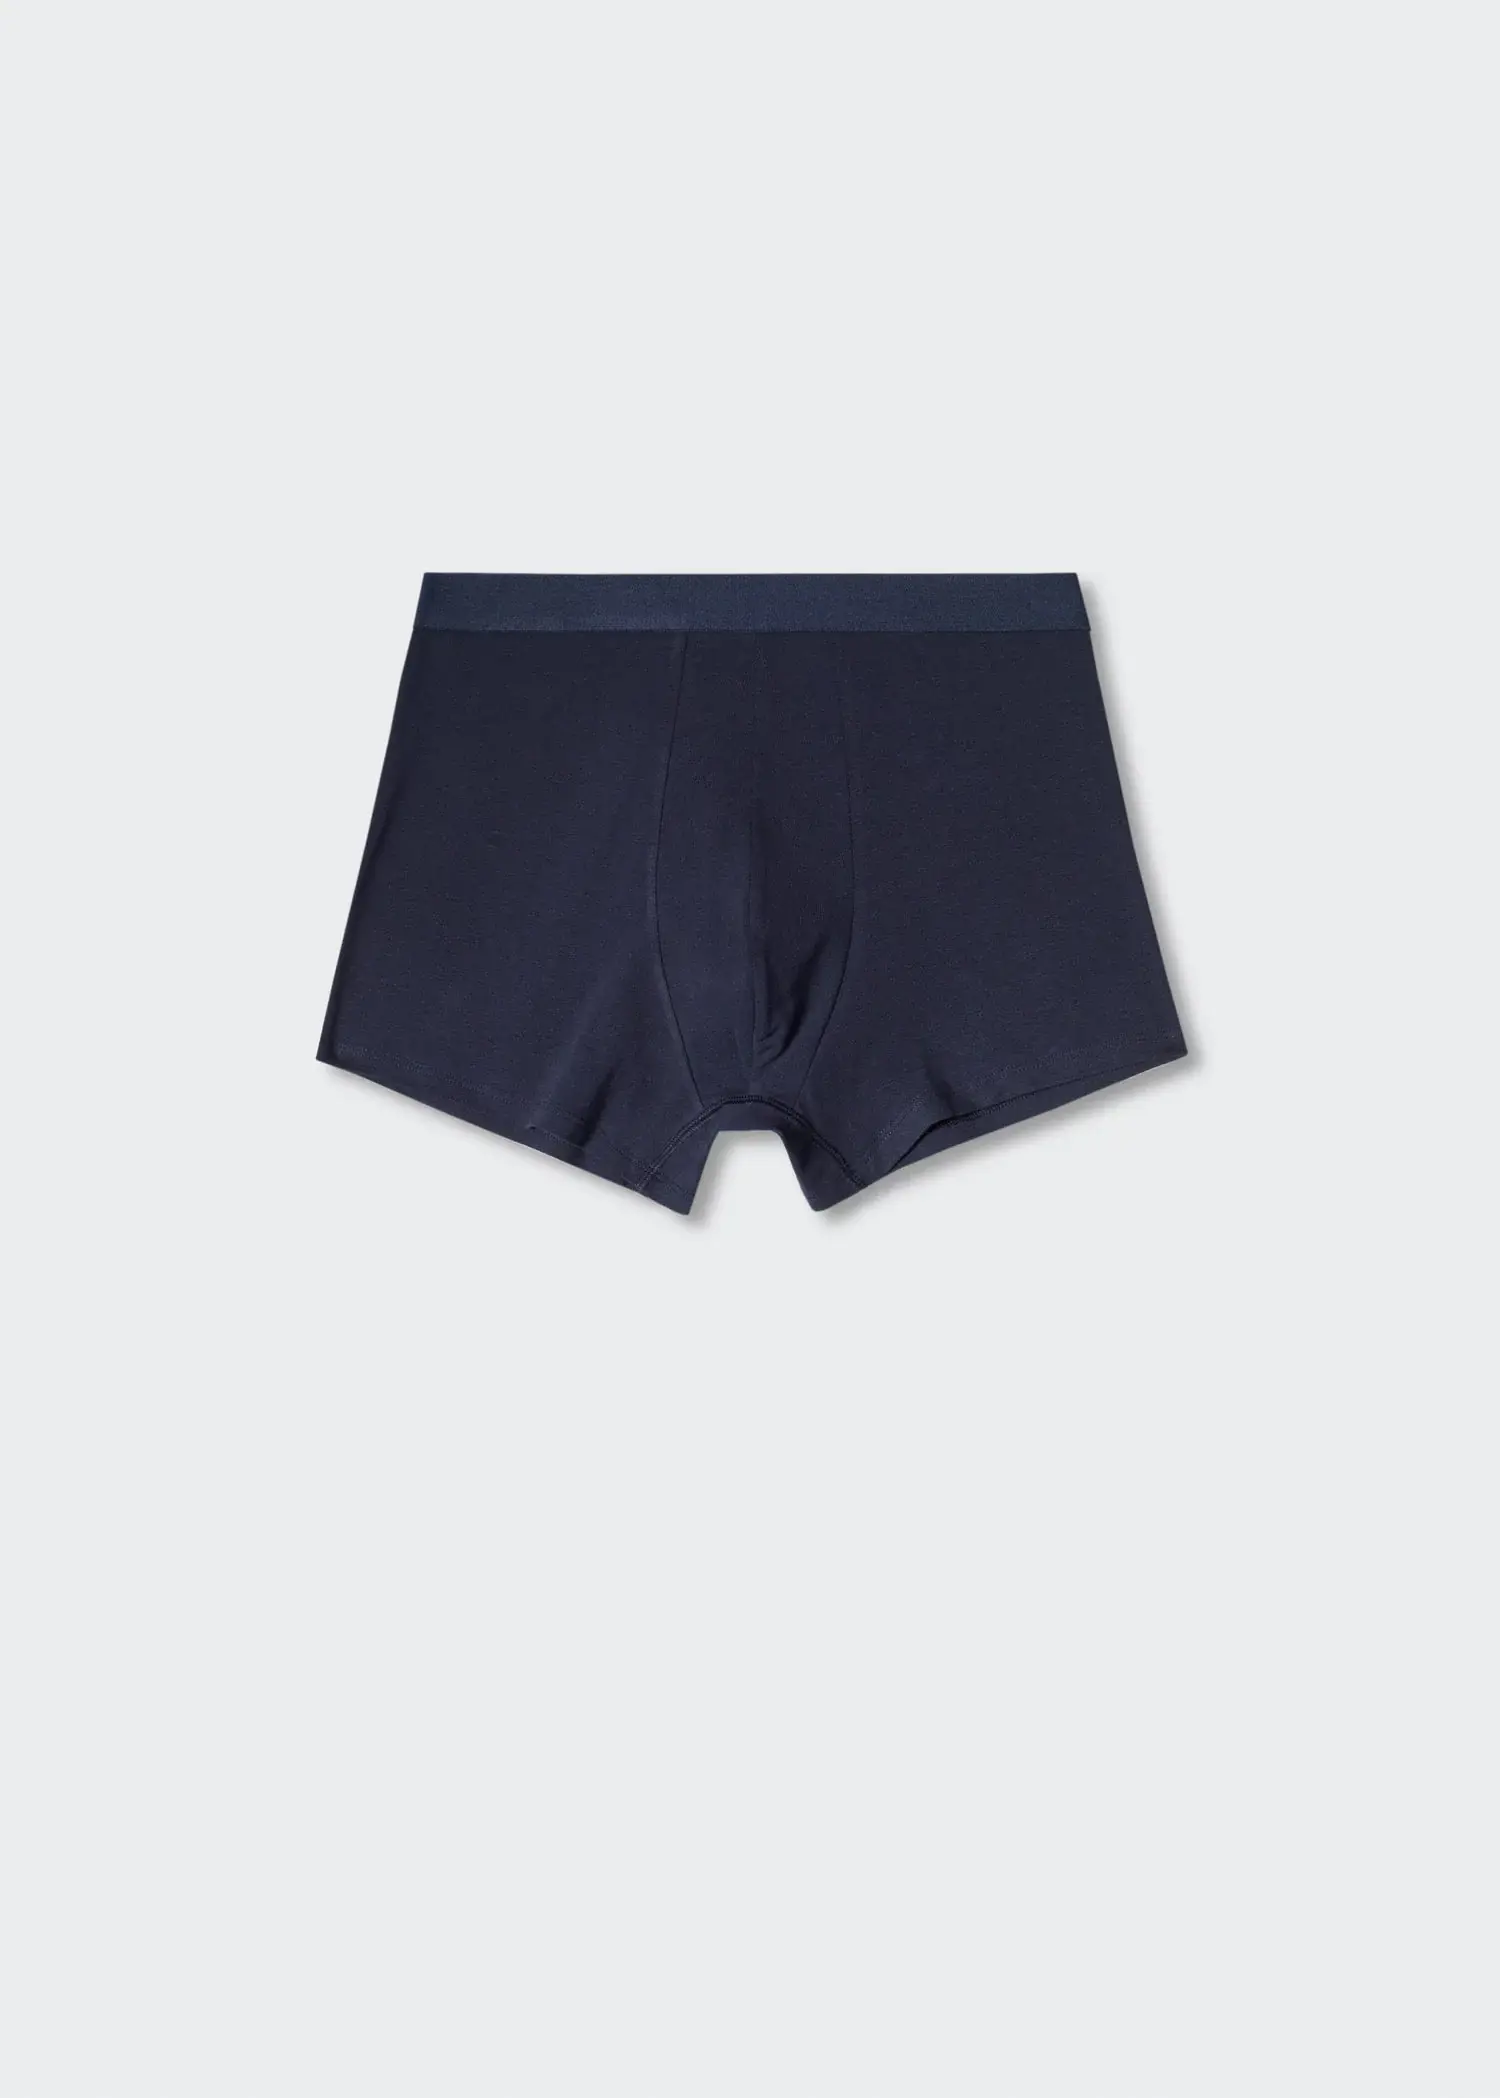 Mango Basic boxer 2 pack. a pair of black boxers are on a white surface. 